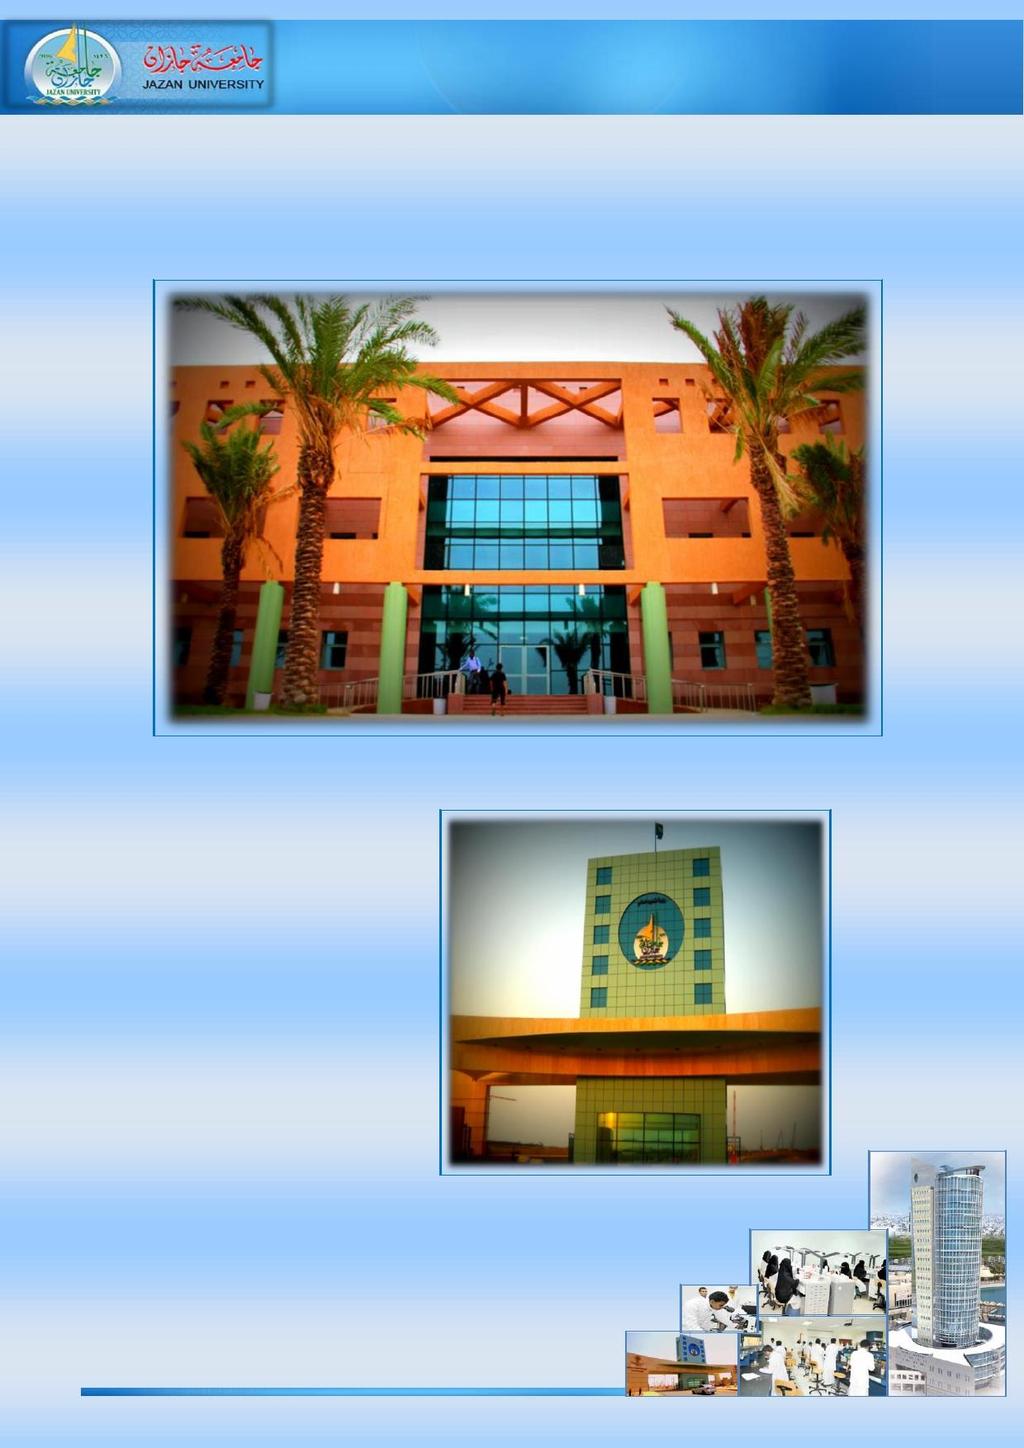 Jazan University Jazan University was established in 2006. It has approximately 60,000 students, male and female. It offers bachelor degrees in most majors and diplomas in some fields.